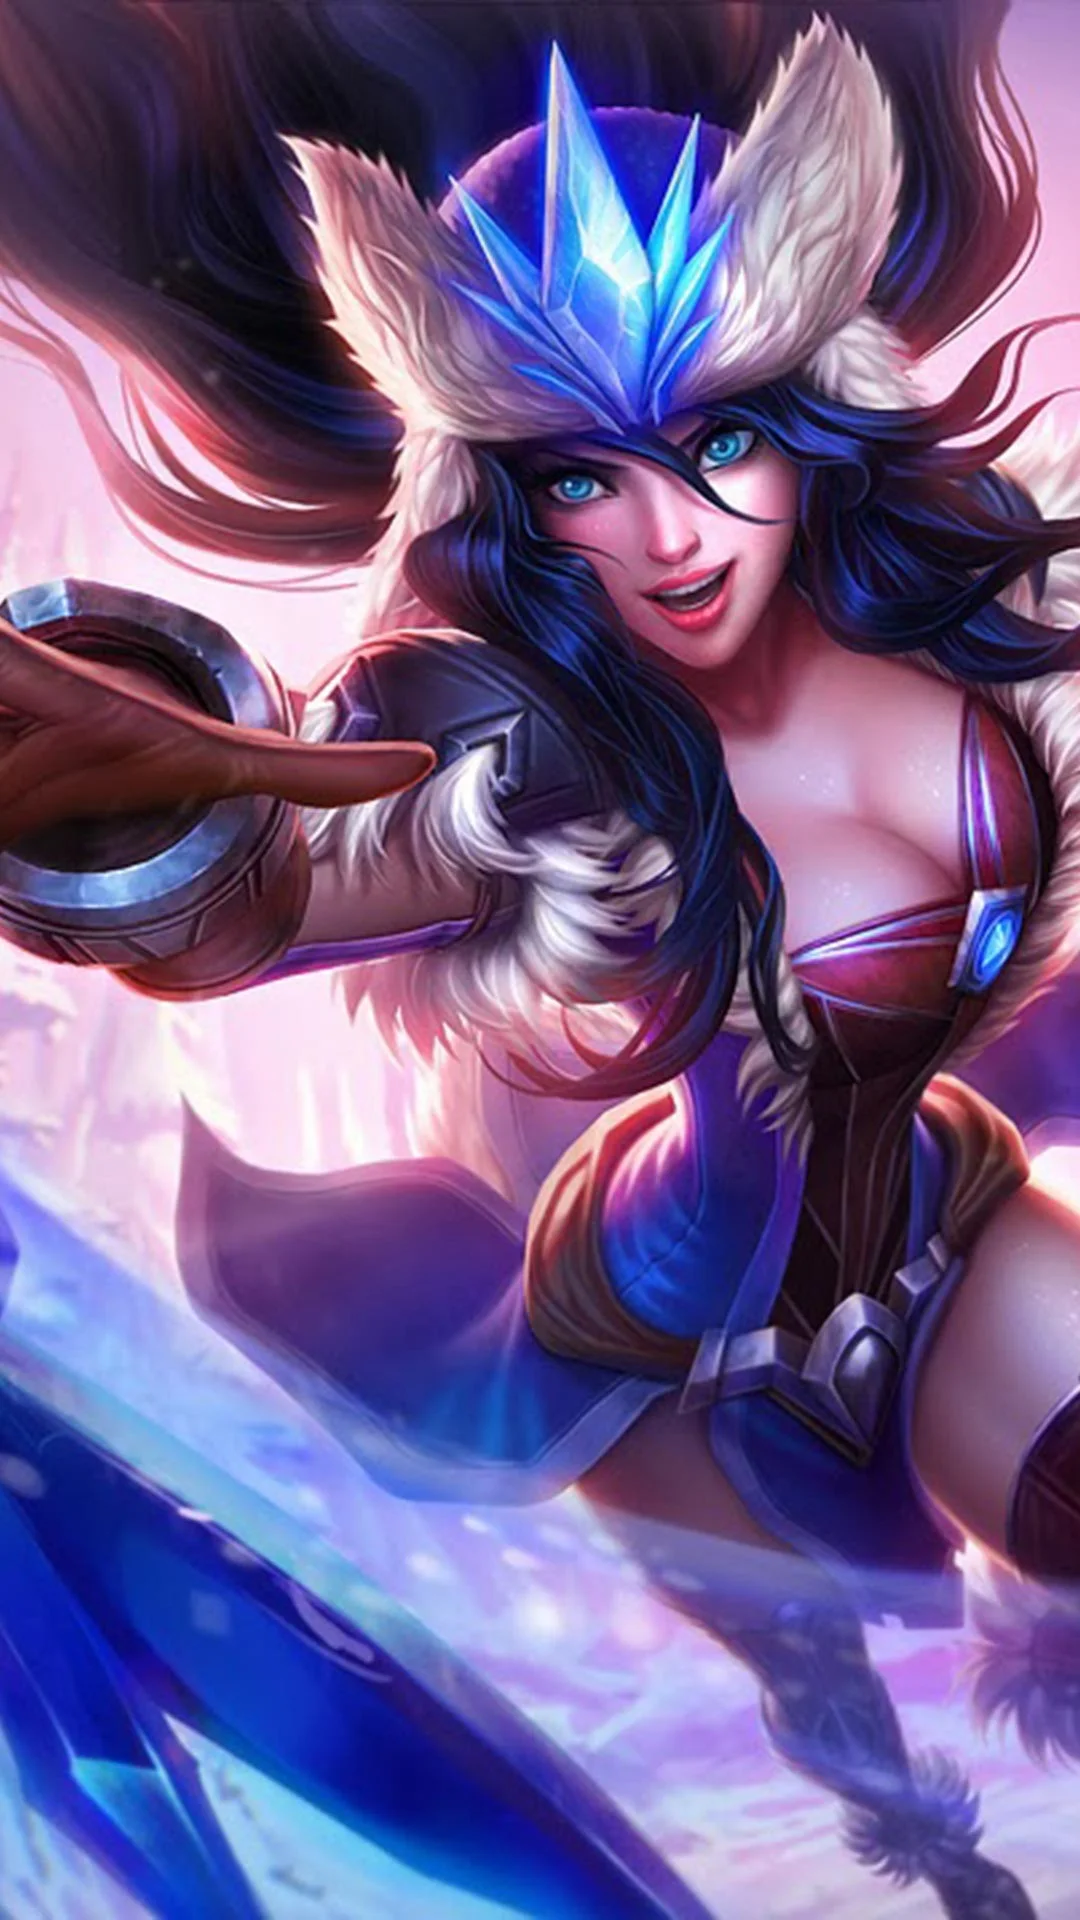 Snowstorm Sivir Snowdown Skin android, iphone wallpaper, mobile background. Game LolFemale